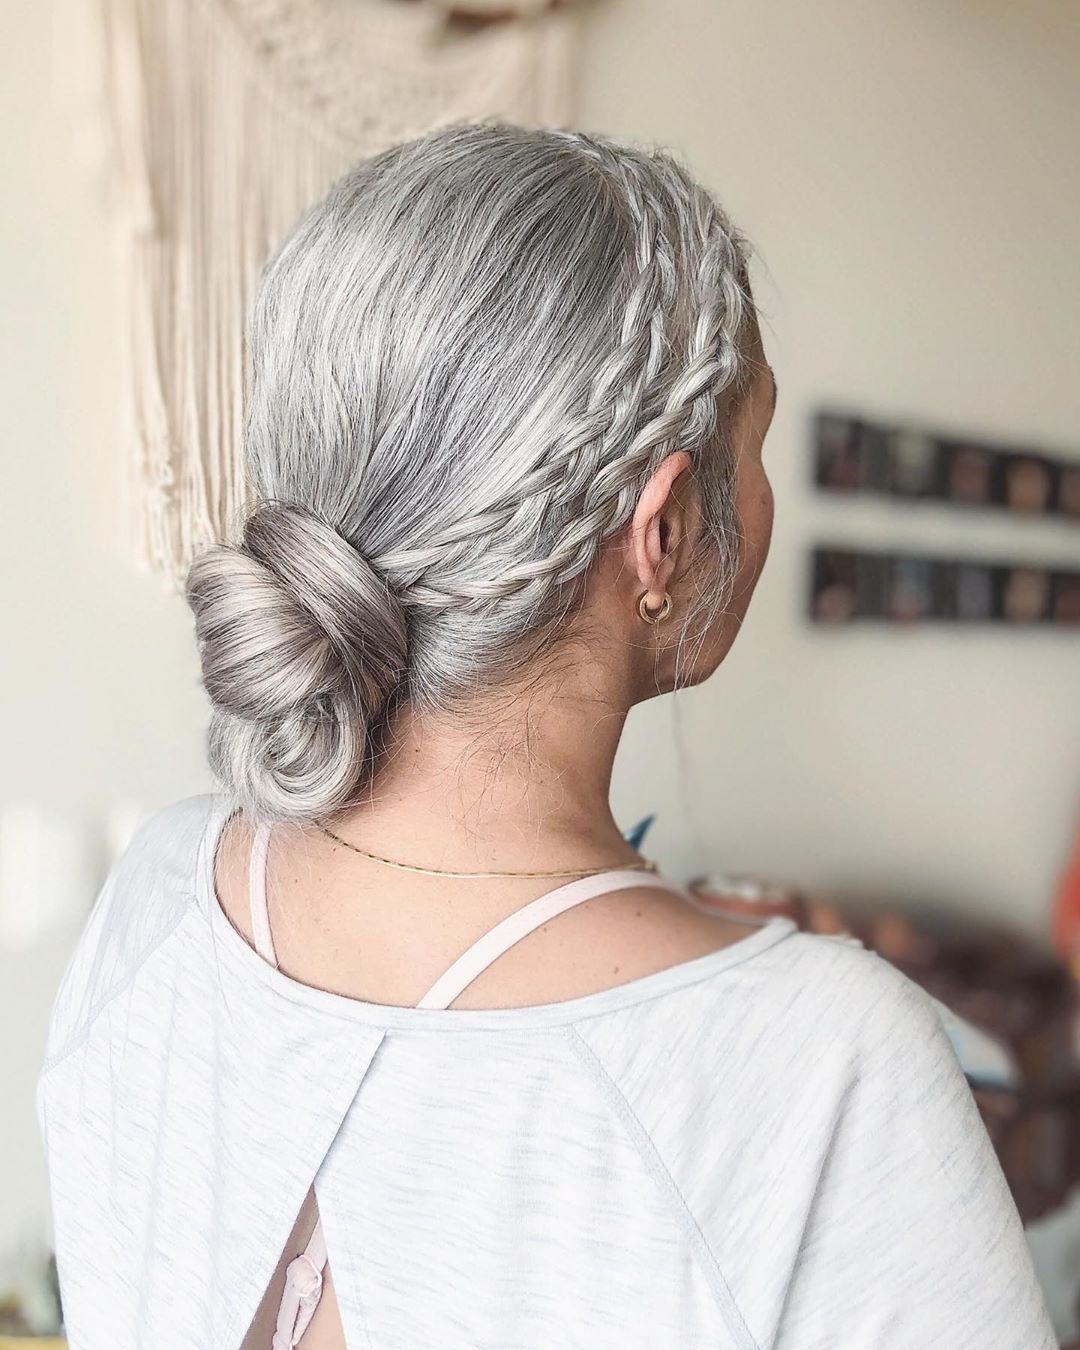 Top 10 Trendy Hairstyles Helps Your Grandma Look Chic and Younger